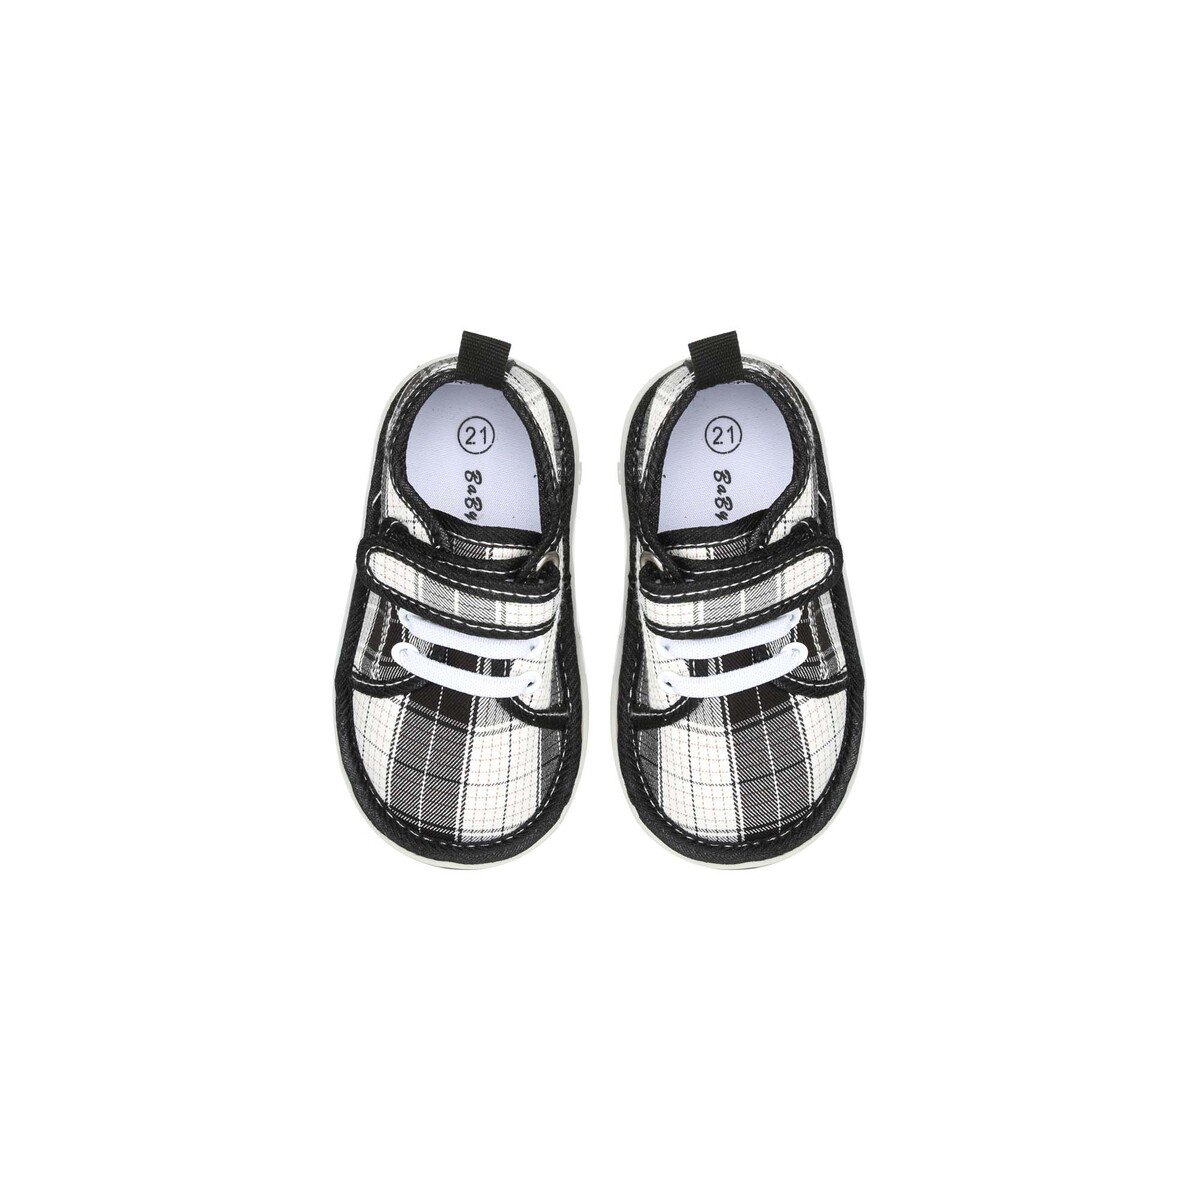 Baby Love Baby Shoes with Sound L2005 Black, 19